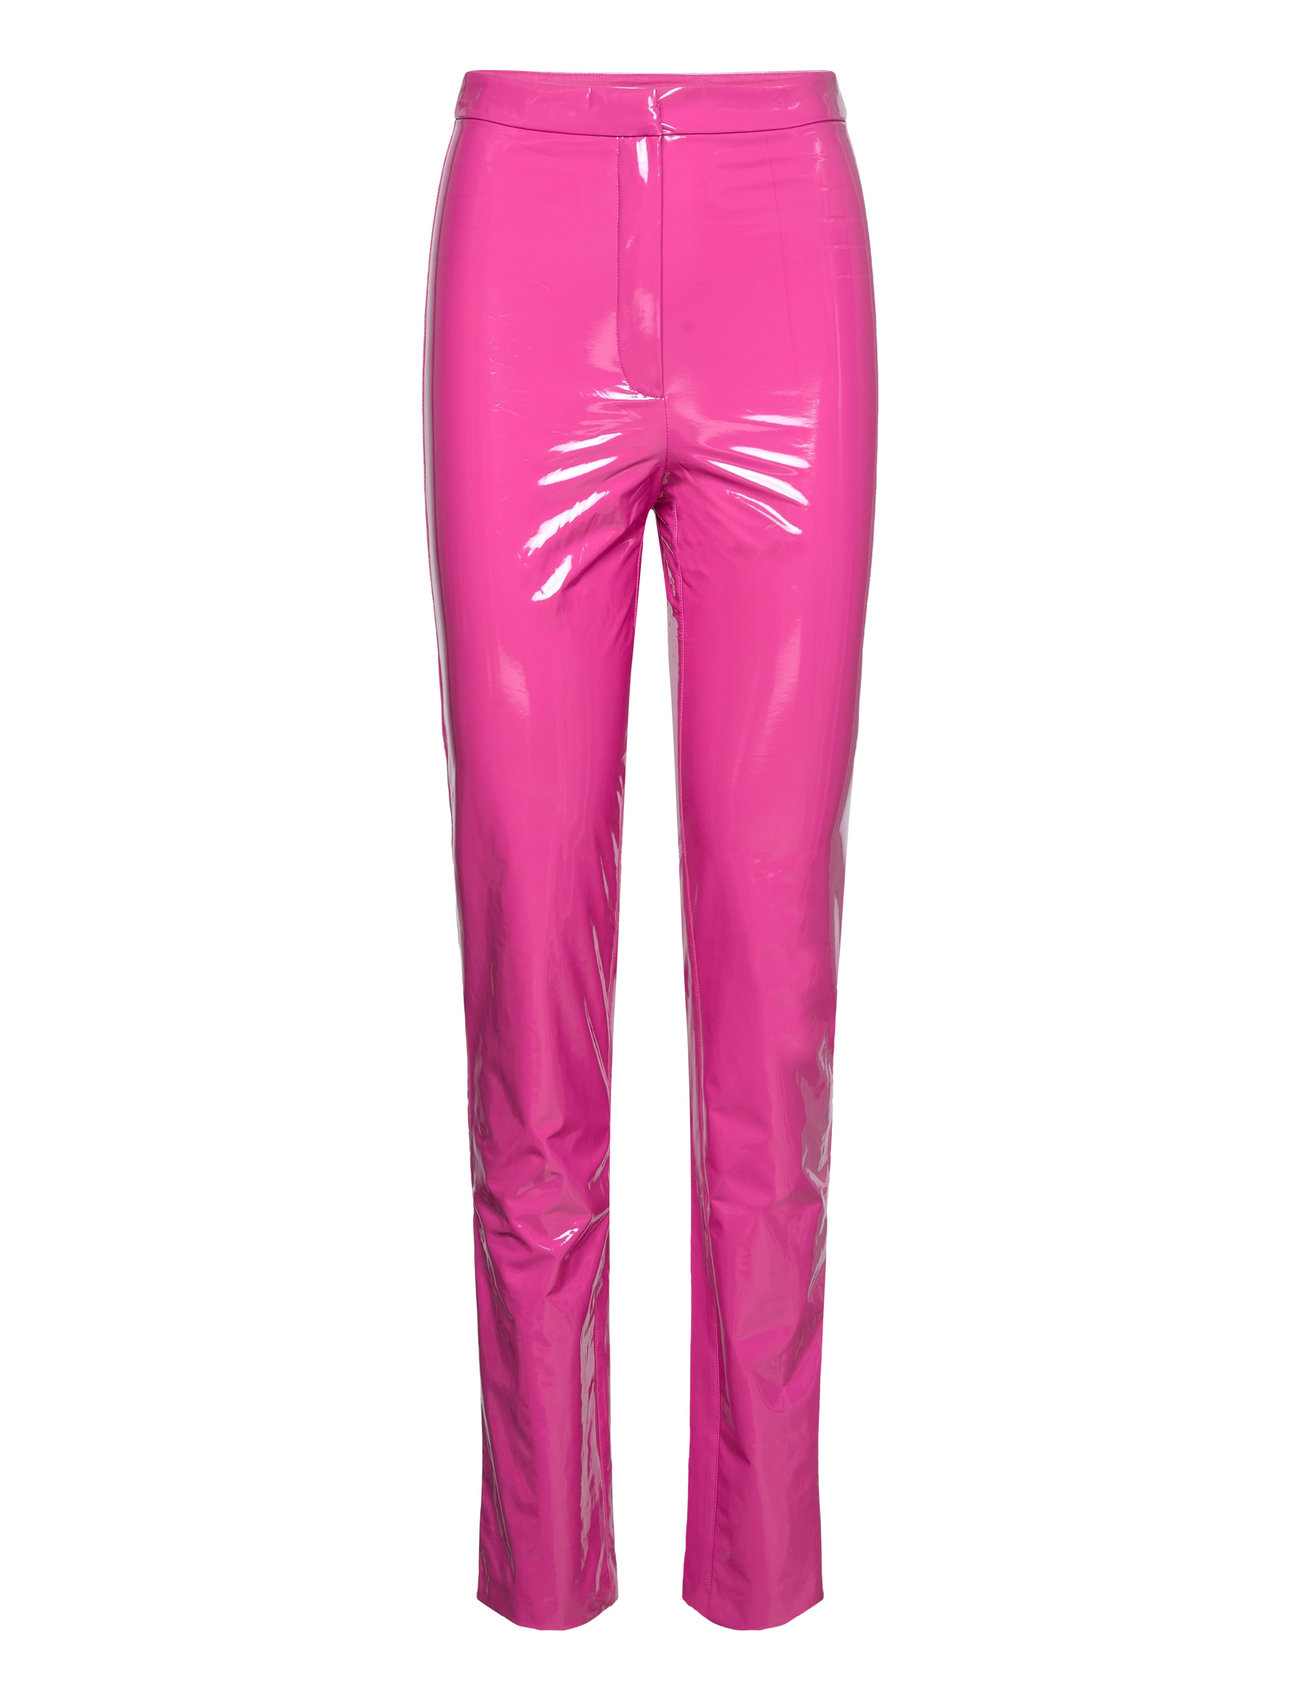 Patent Coated Pants Bottoms Trousers Leather Leggings-Bukser Pink ROTATE Birger Christensen